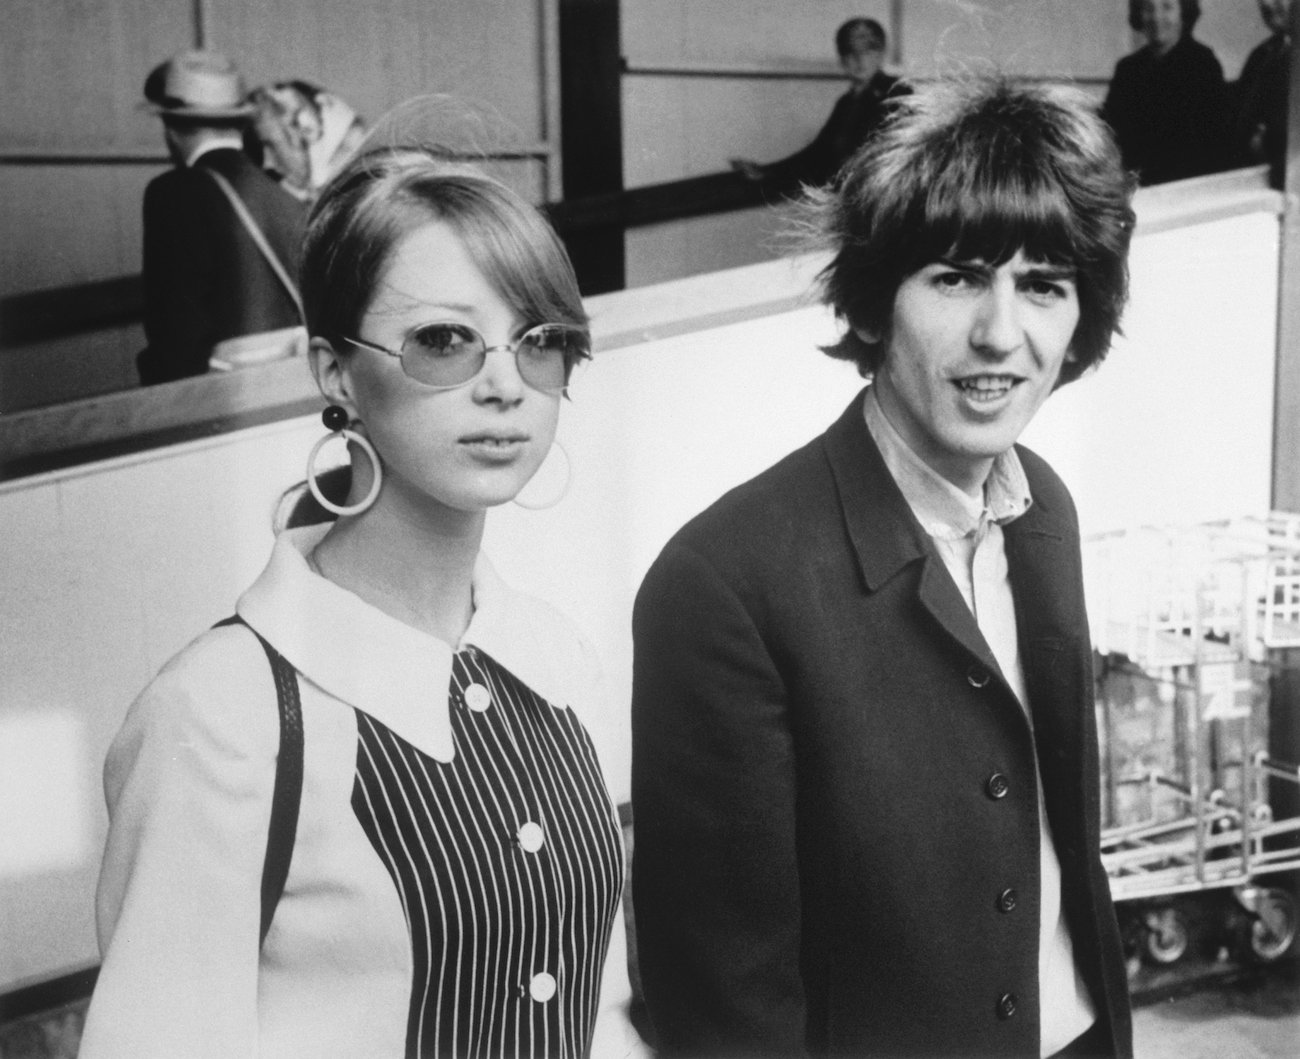 George Harrison and his wife, Pattie Boyd, setting off for their honeymoon in 1966.